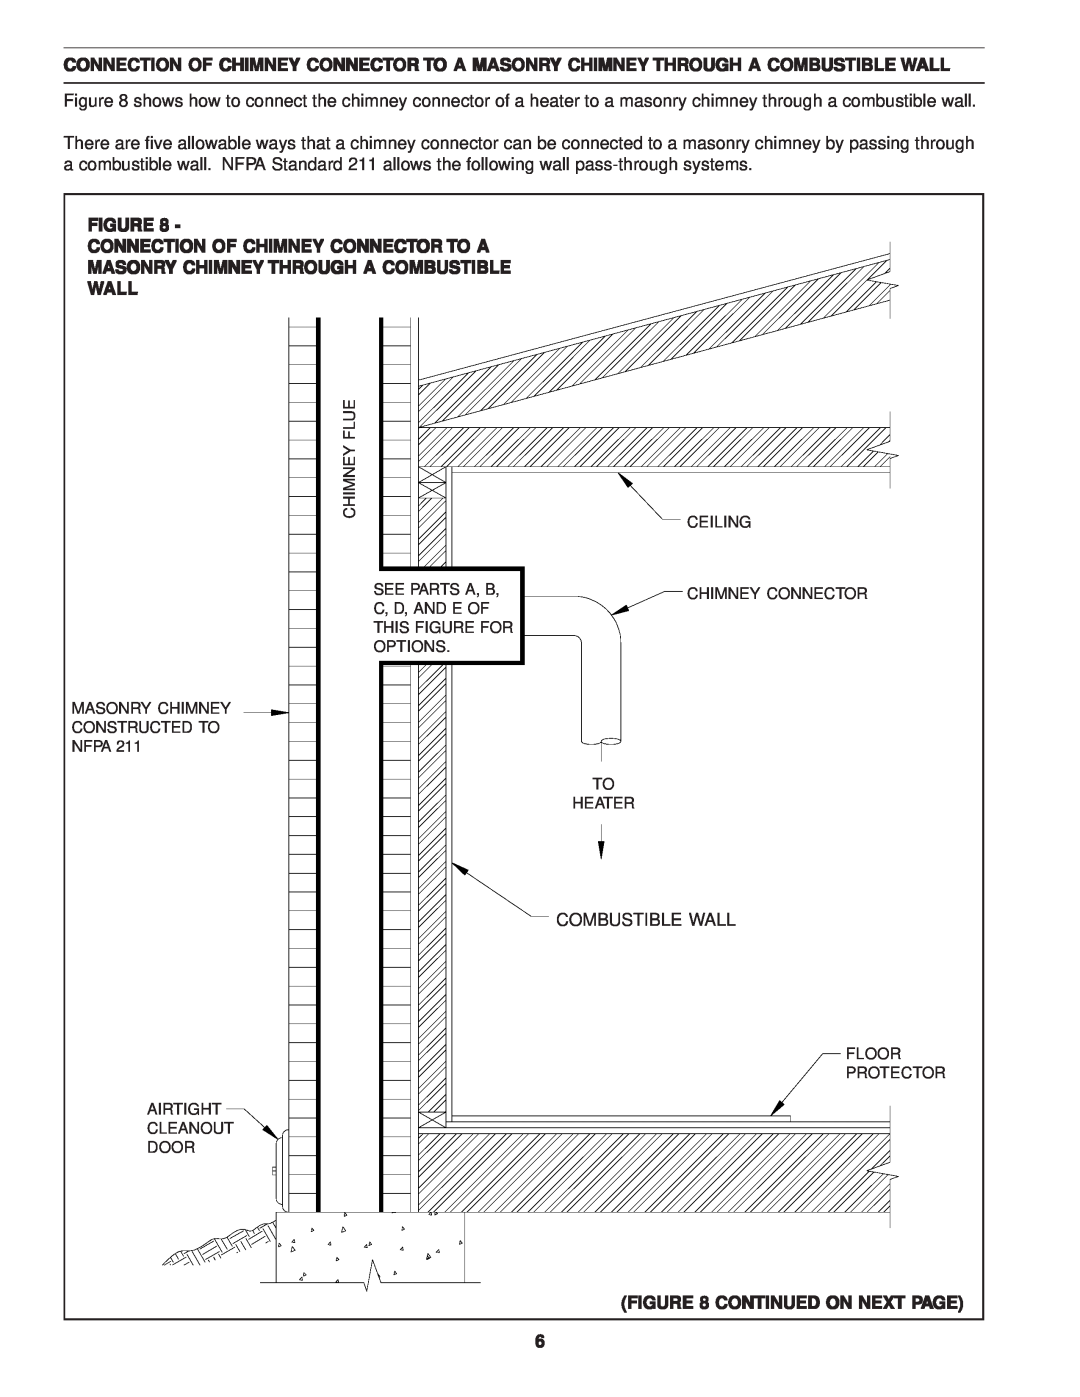 United States Stove C242 Figure Connection Of Chimney Connector To A, Masonry Chimney Through A Combustible Wall 